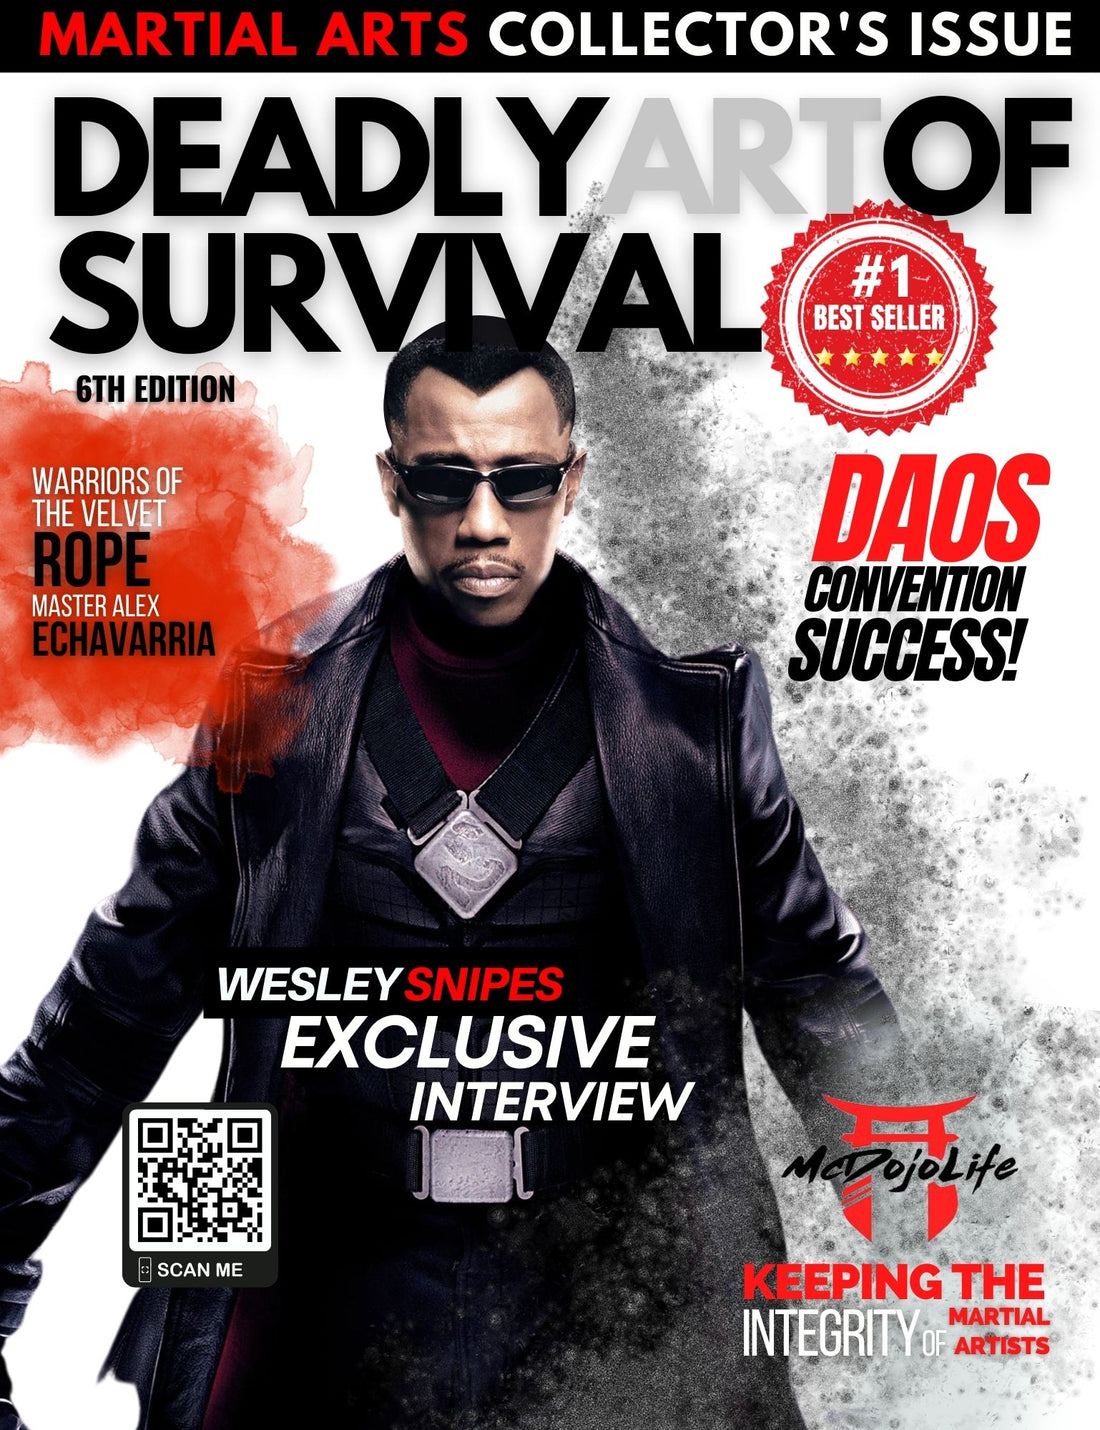 Q&A interview with Mcdojolife | Deadly Art of Survival Magazine